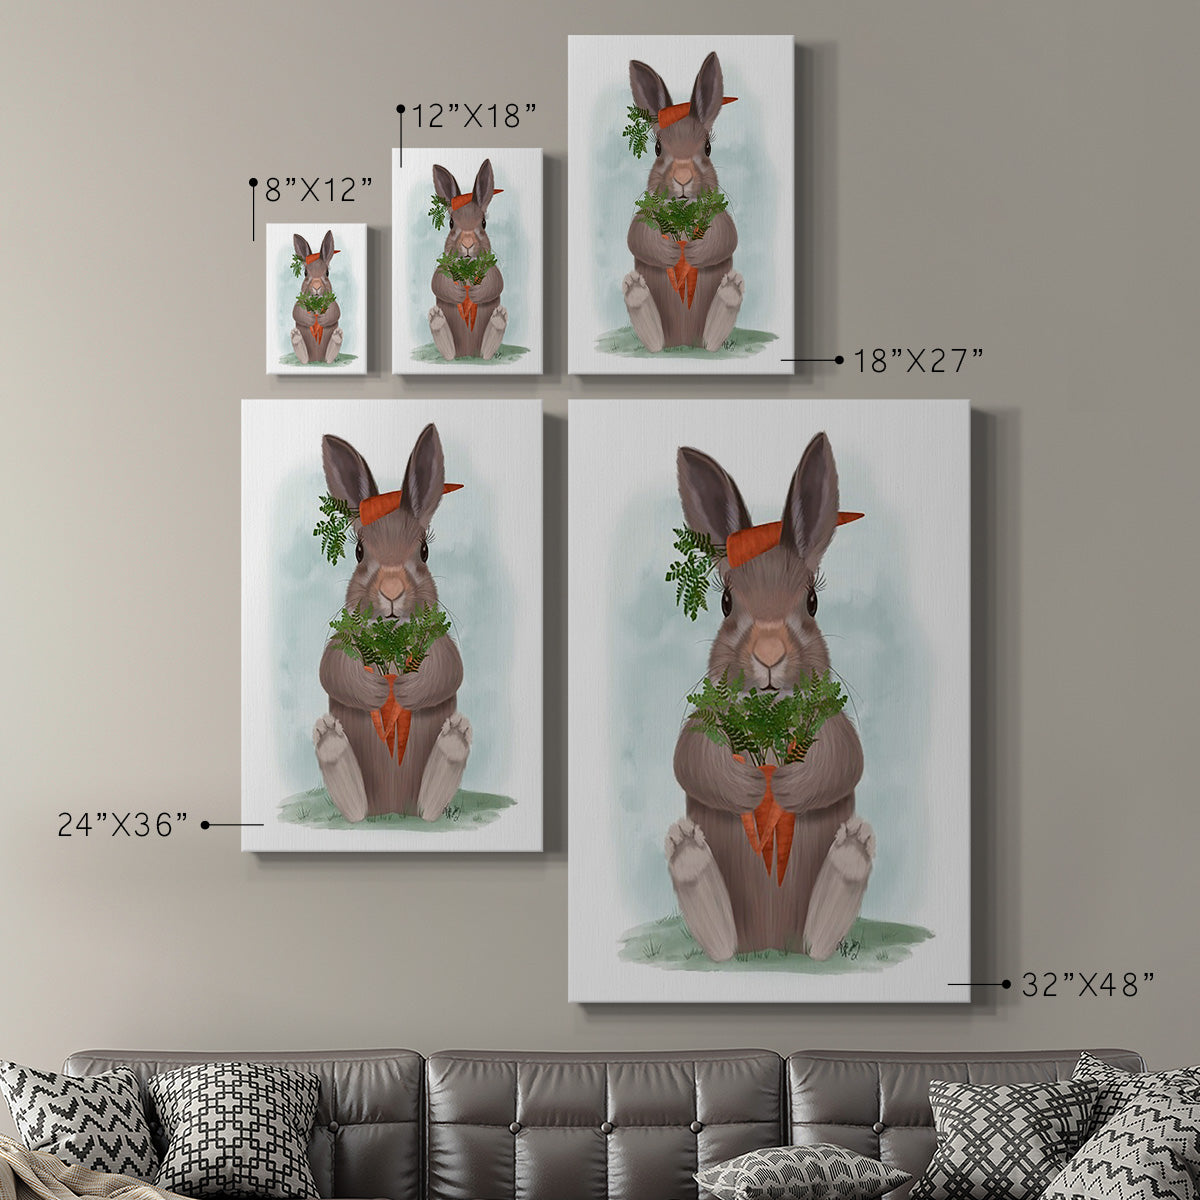 Rabbit Carrot Hug Premium Gallery Wrapped Canvas - Ready to Hang